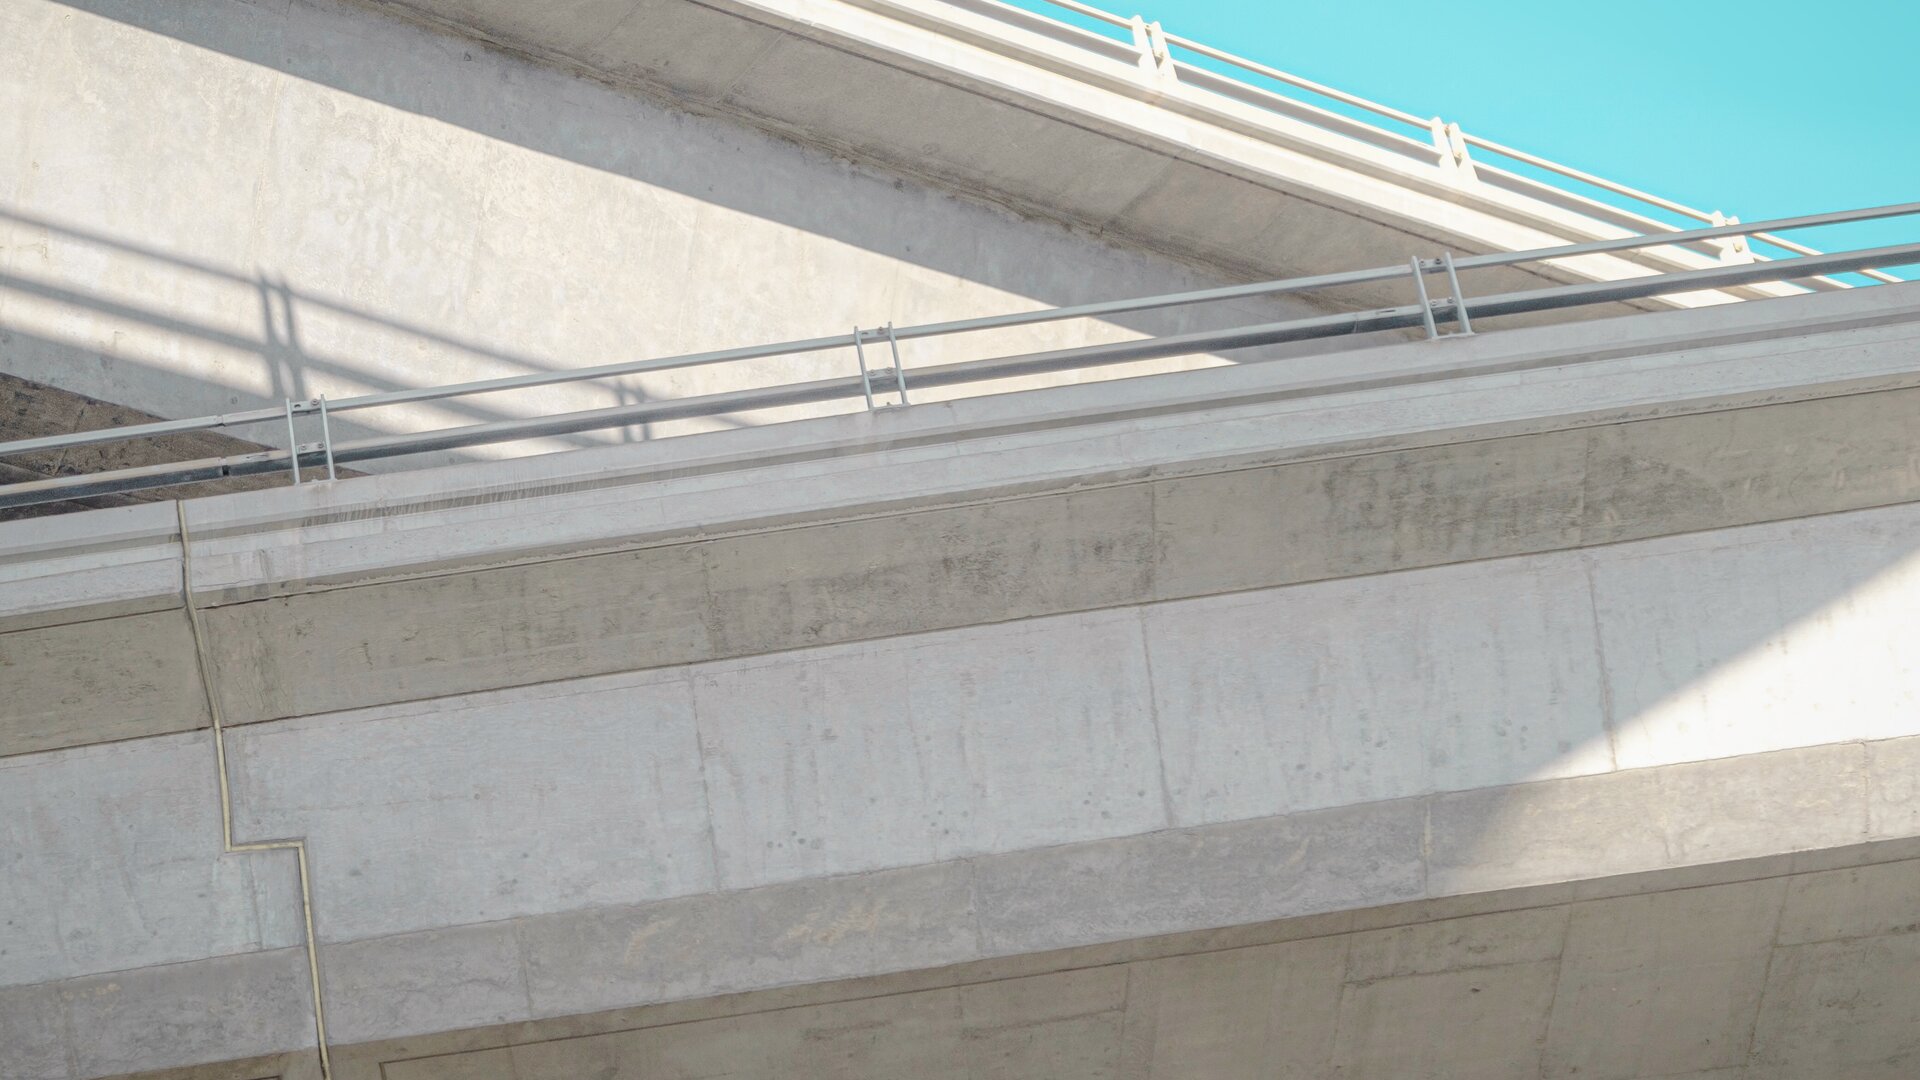 Close-up of two crossing concrete railings of a motorway bridge with visible expansion joints.